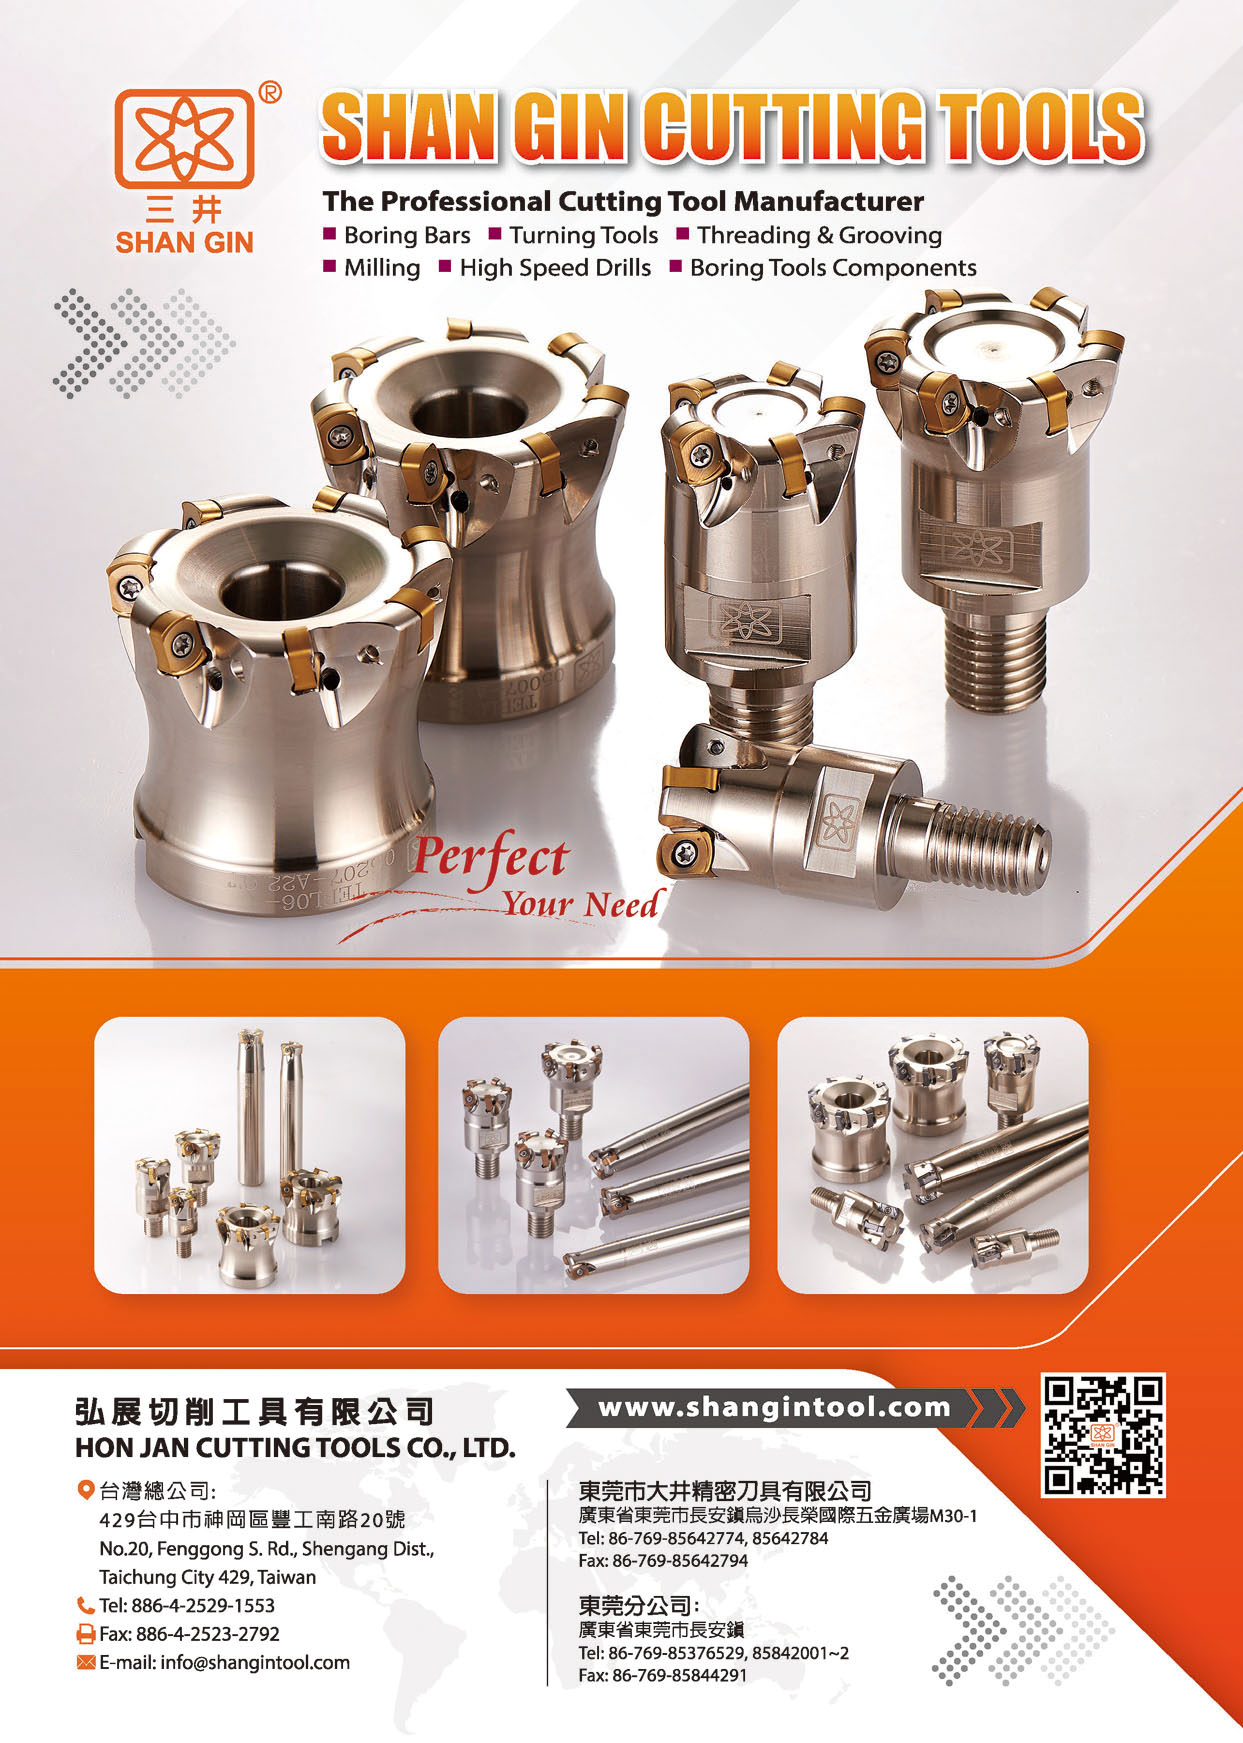 Who Makes Machinery in Taiwan HON JAN CUTTING TOOLS CO., LTD.